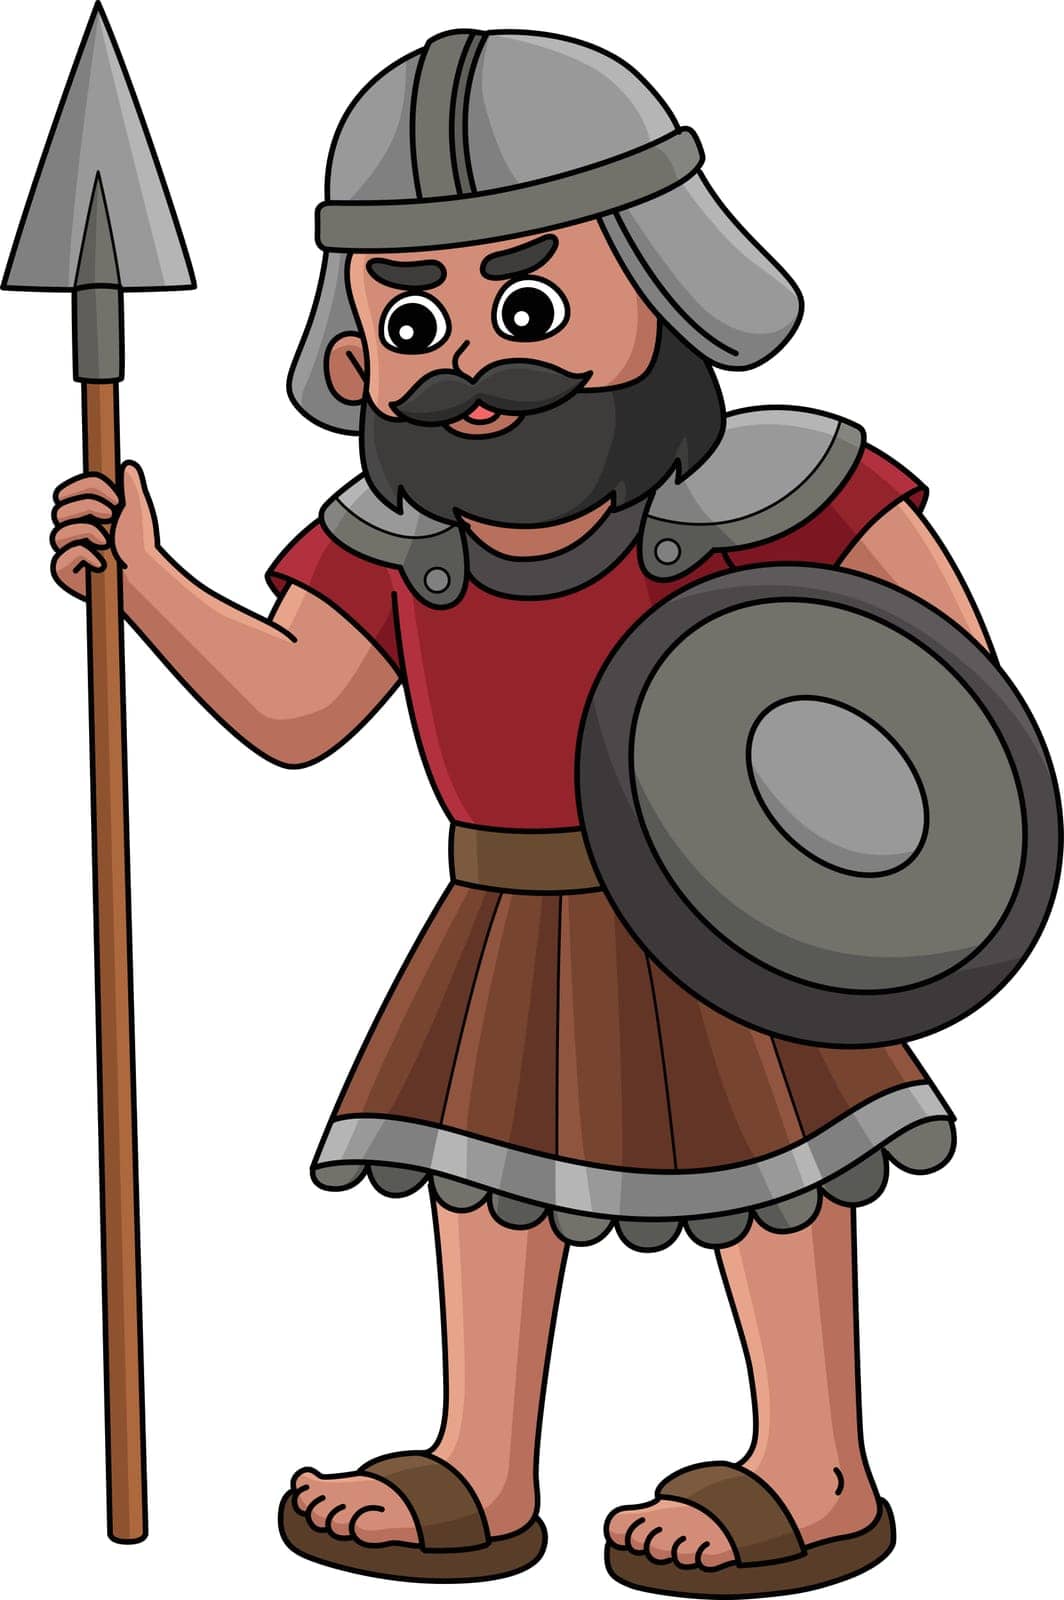 Goliath with a Spear Cartoon Colored Clipart by abbydesign